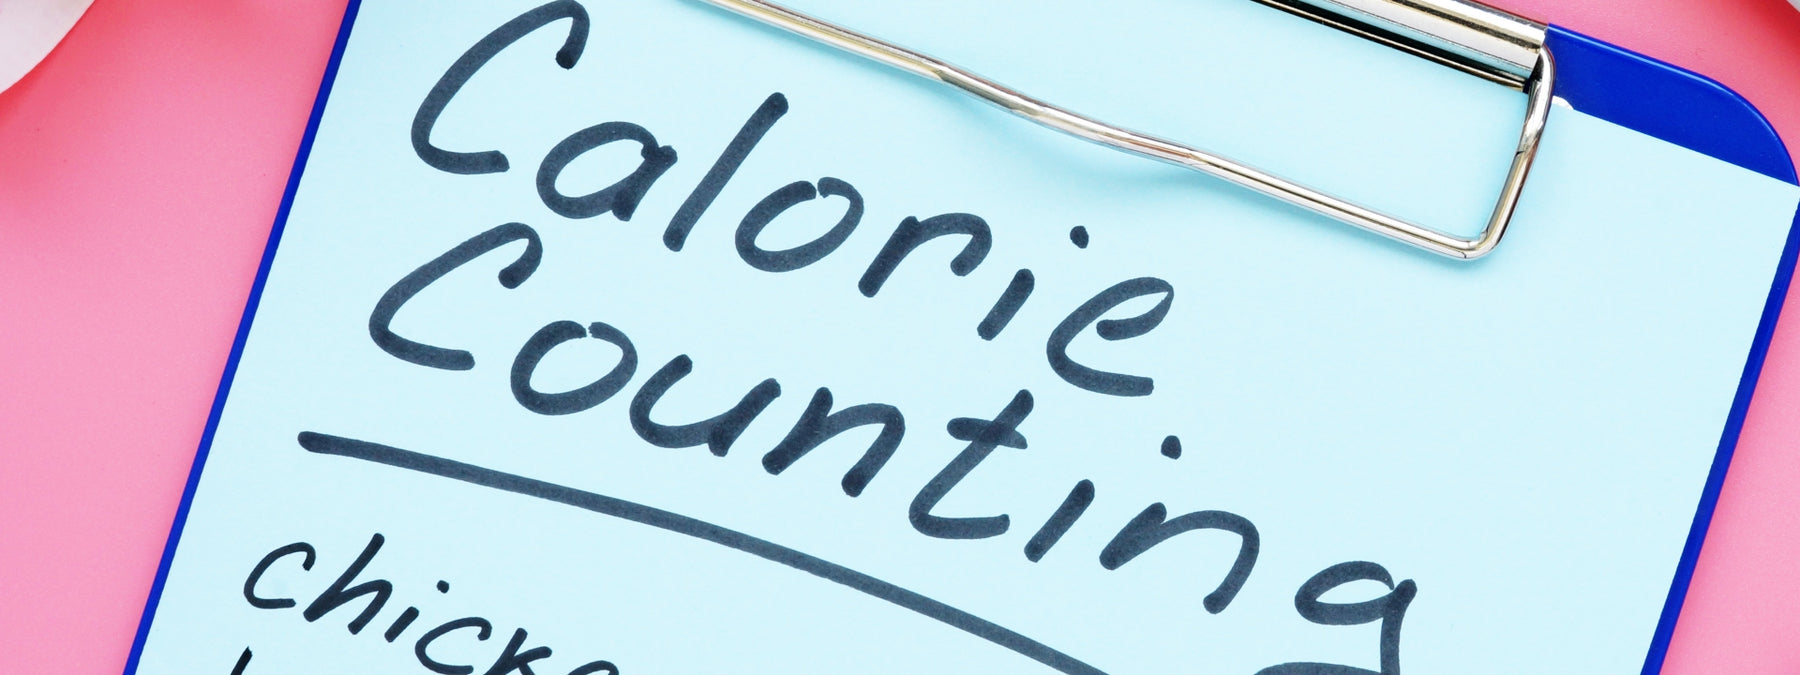 Basics of Calorie Counting - 6 Important Tips